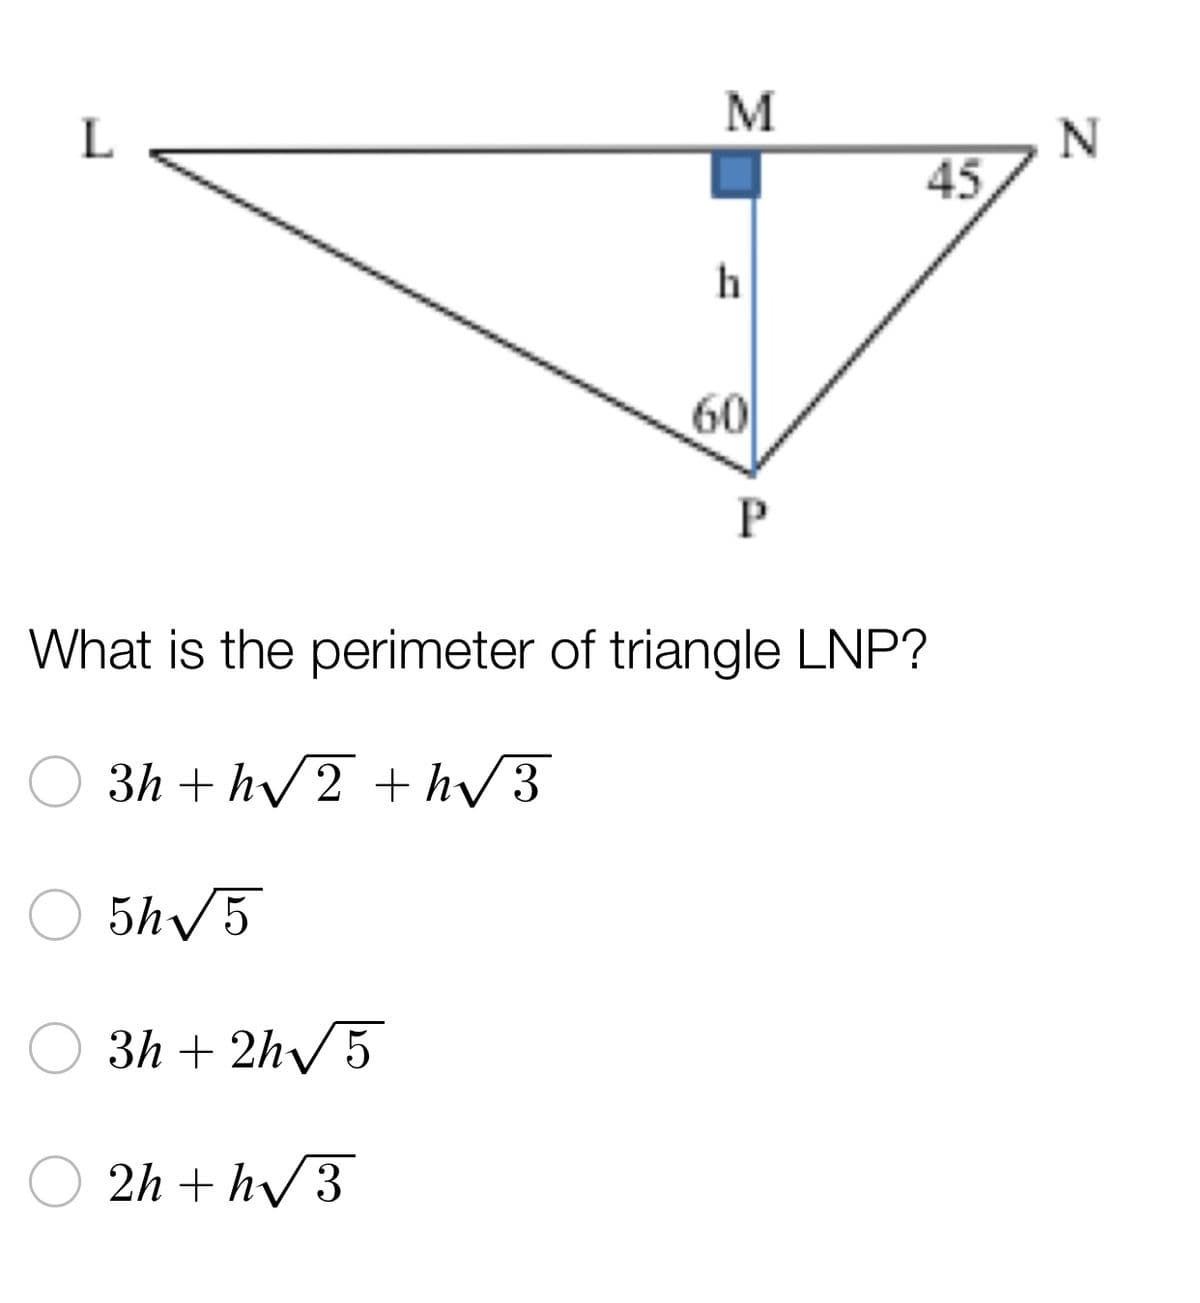 M
L
P
What is the perimeter of triangle LNP?
3h+h√2 + h√3
5h√5
3h+2h√5
2h + h√3
h
60
45
N